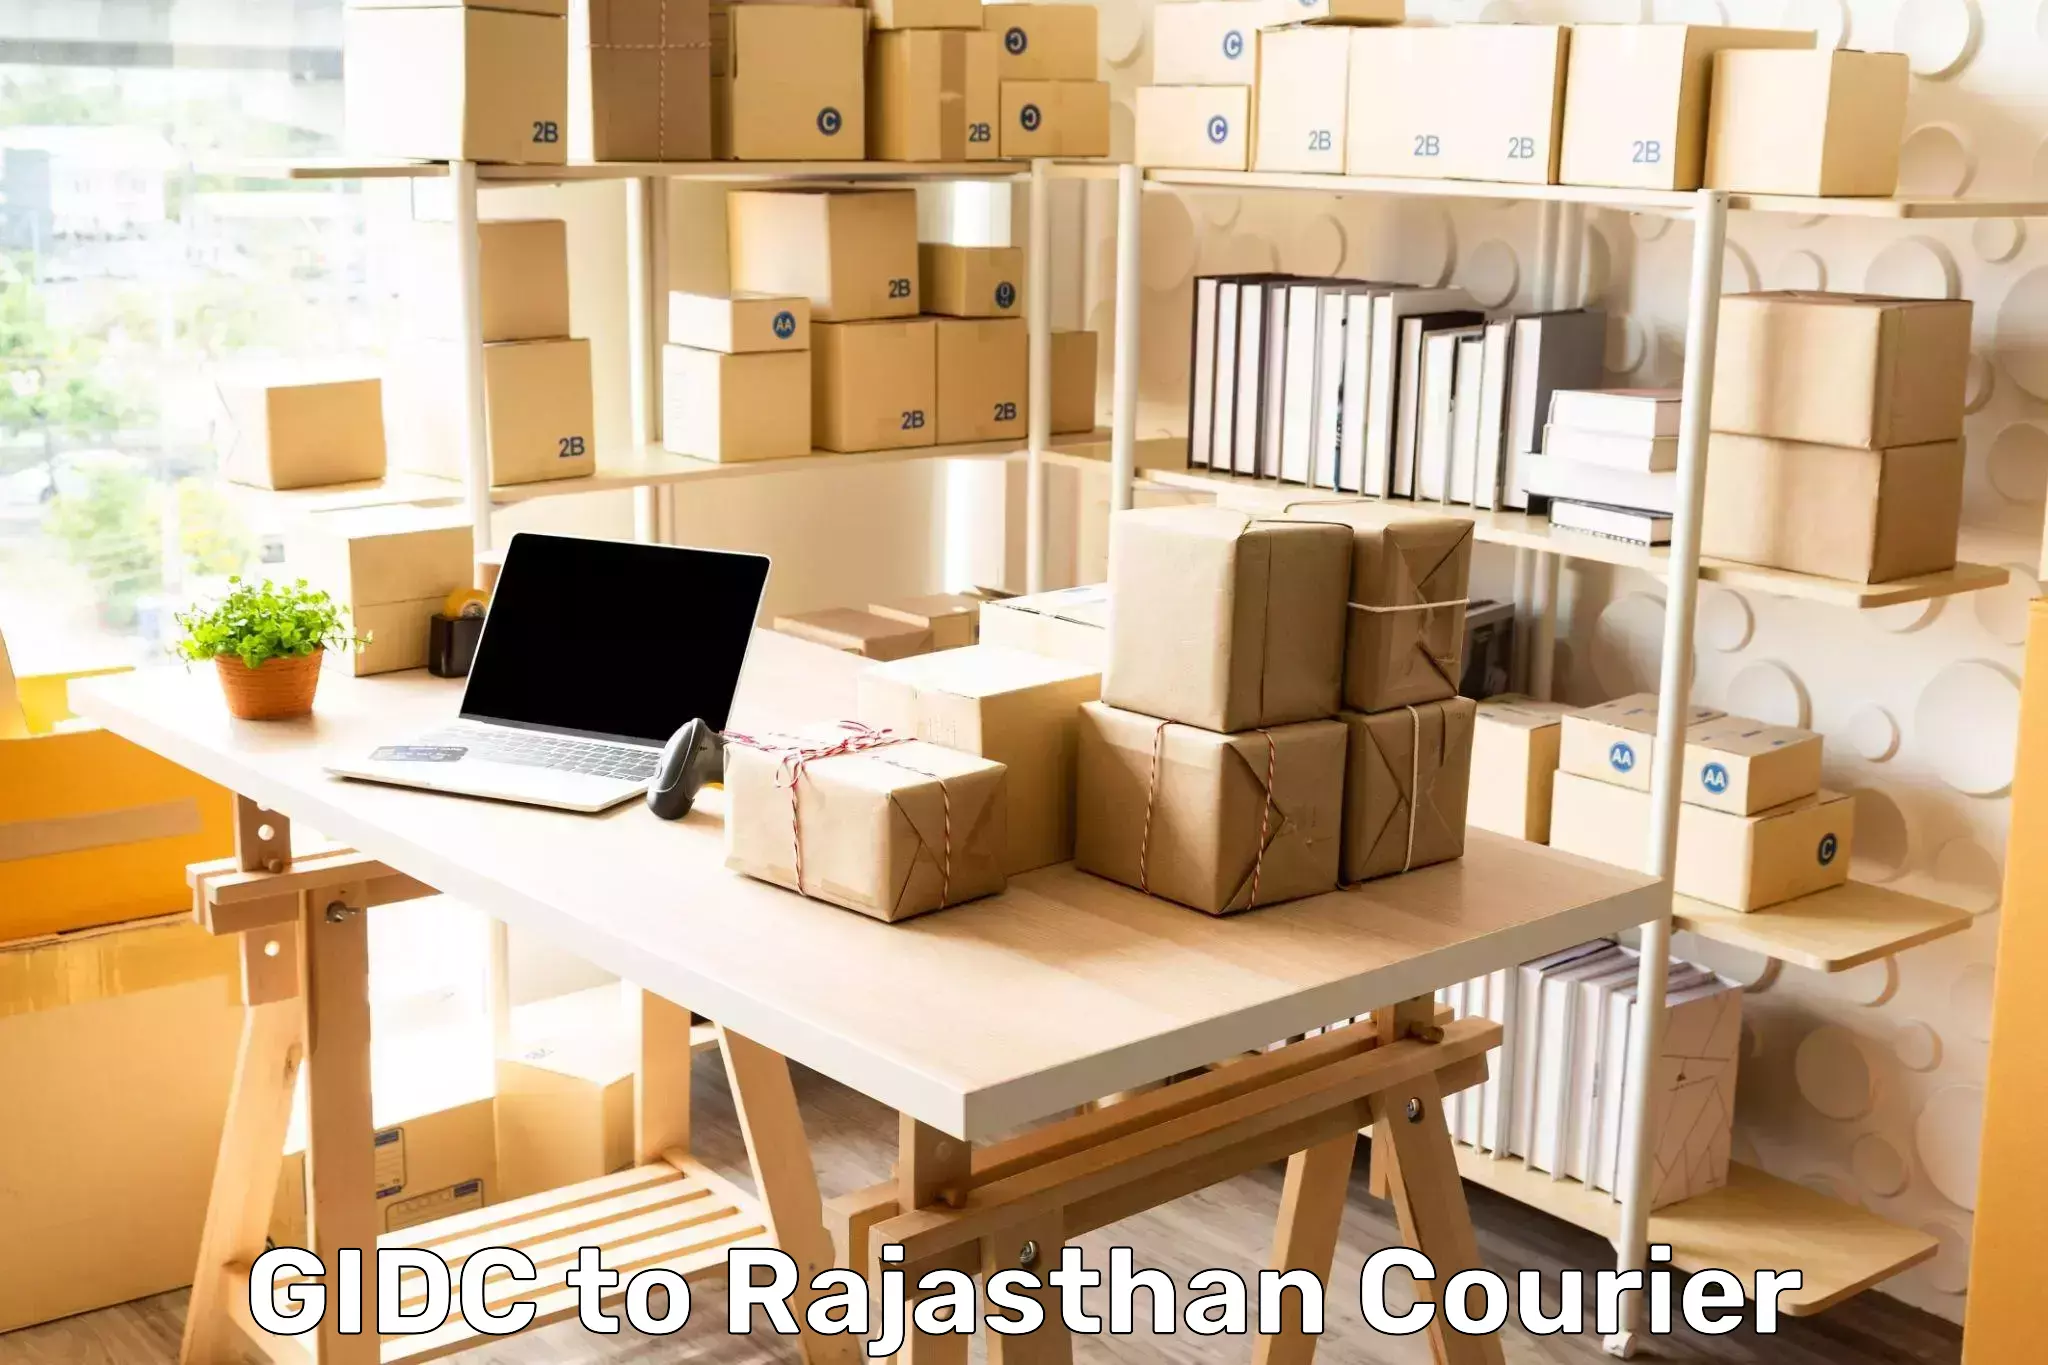 Multi-national courier services GIDC to Jaipur